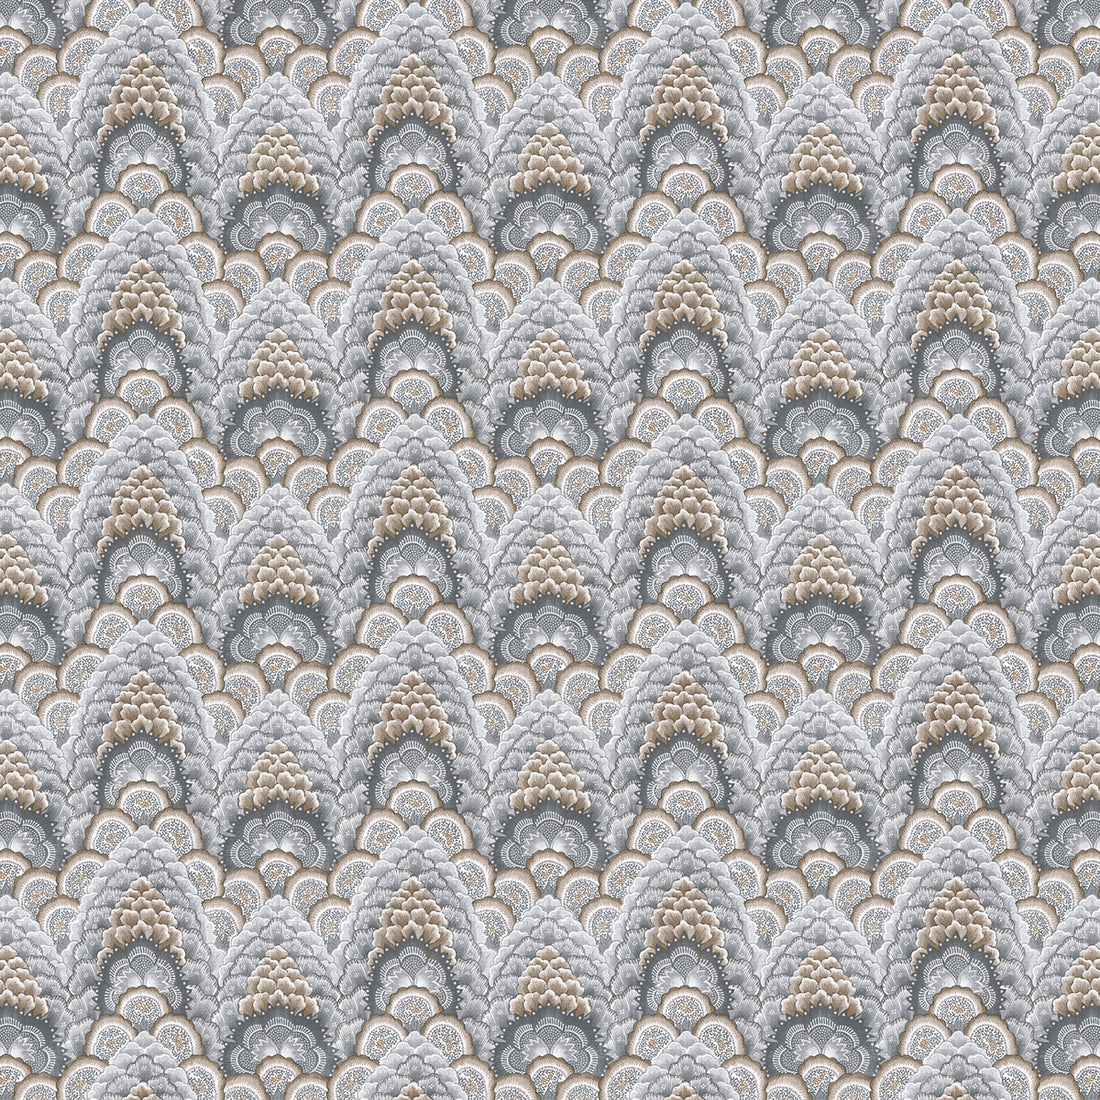 Ganges fabric in tabaco/gris color - pattern GDT5543.005.0 - by Gaston y Daniela in the Gaston Libreria collection